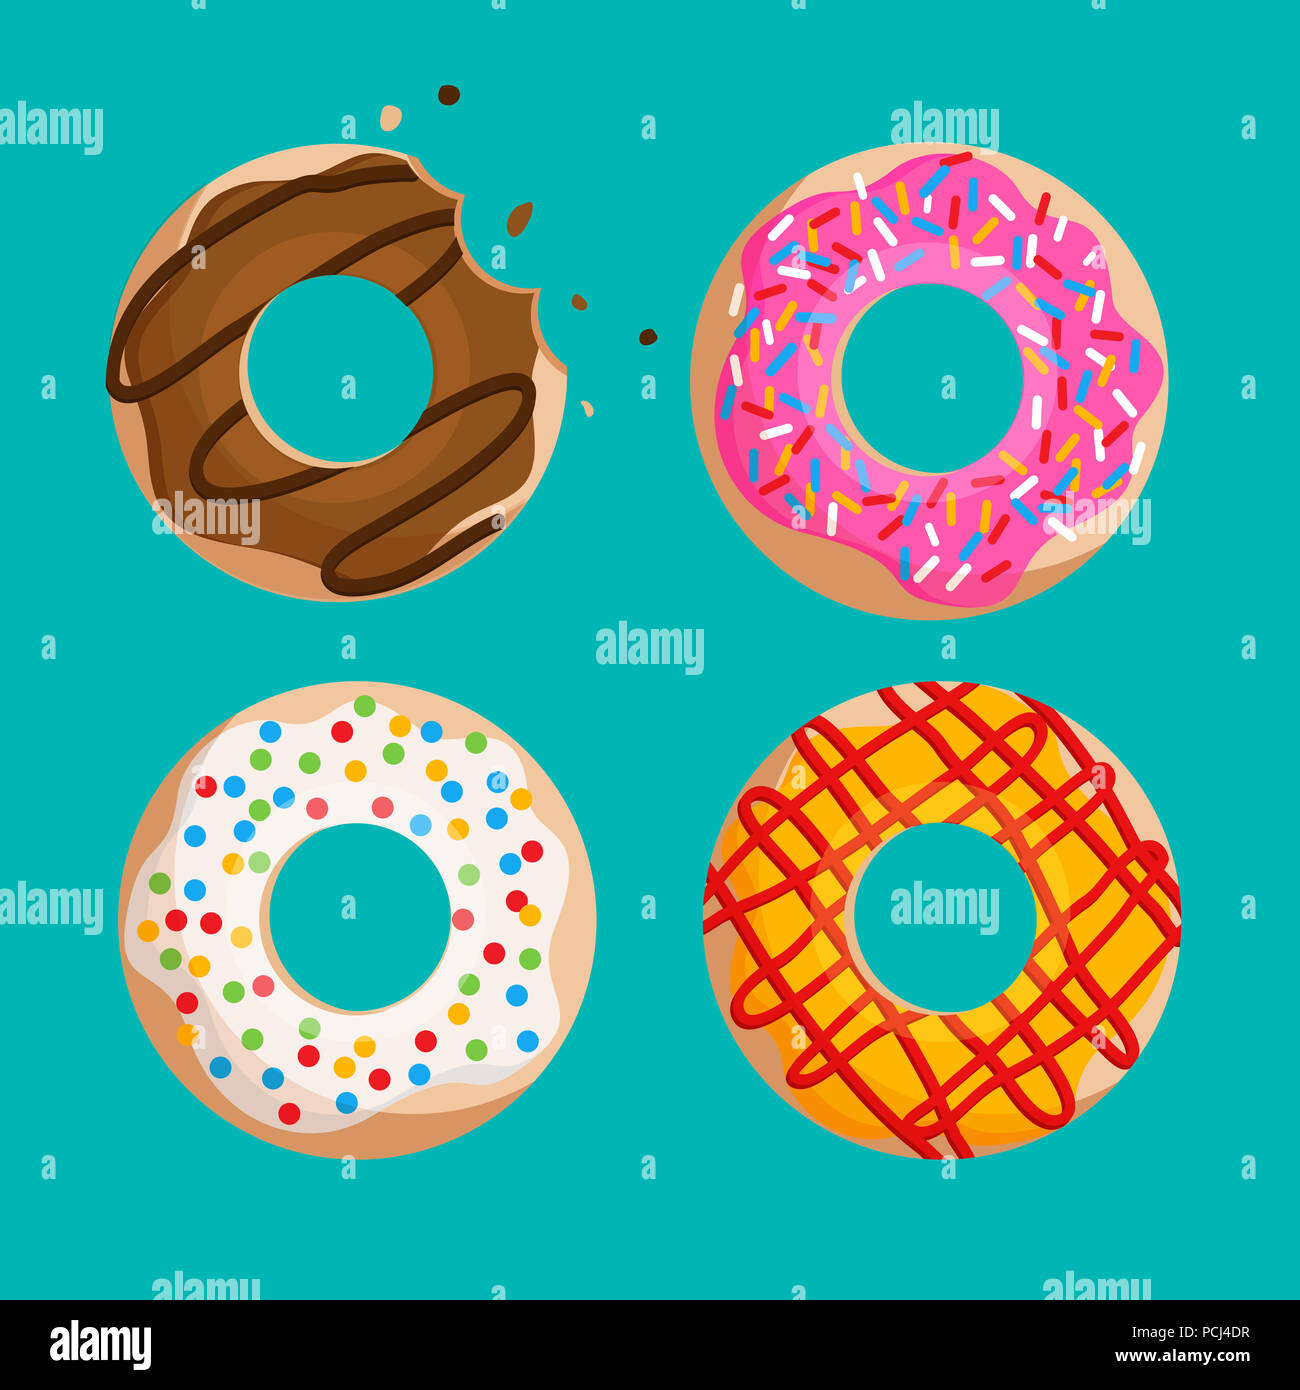 donuts vector set isolated on green background graphic Stock Photo